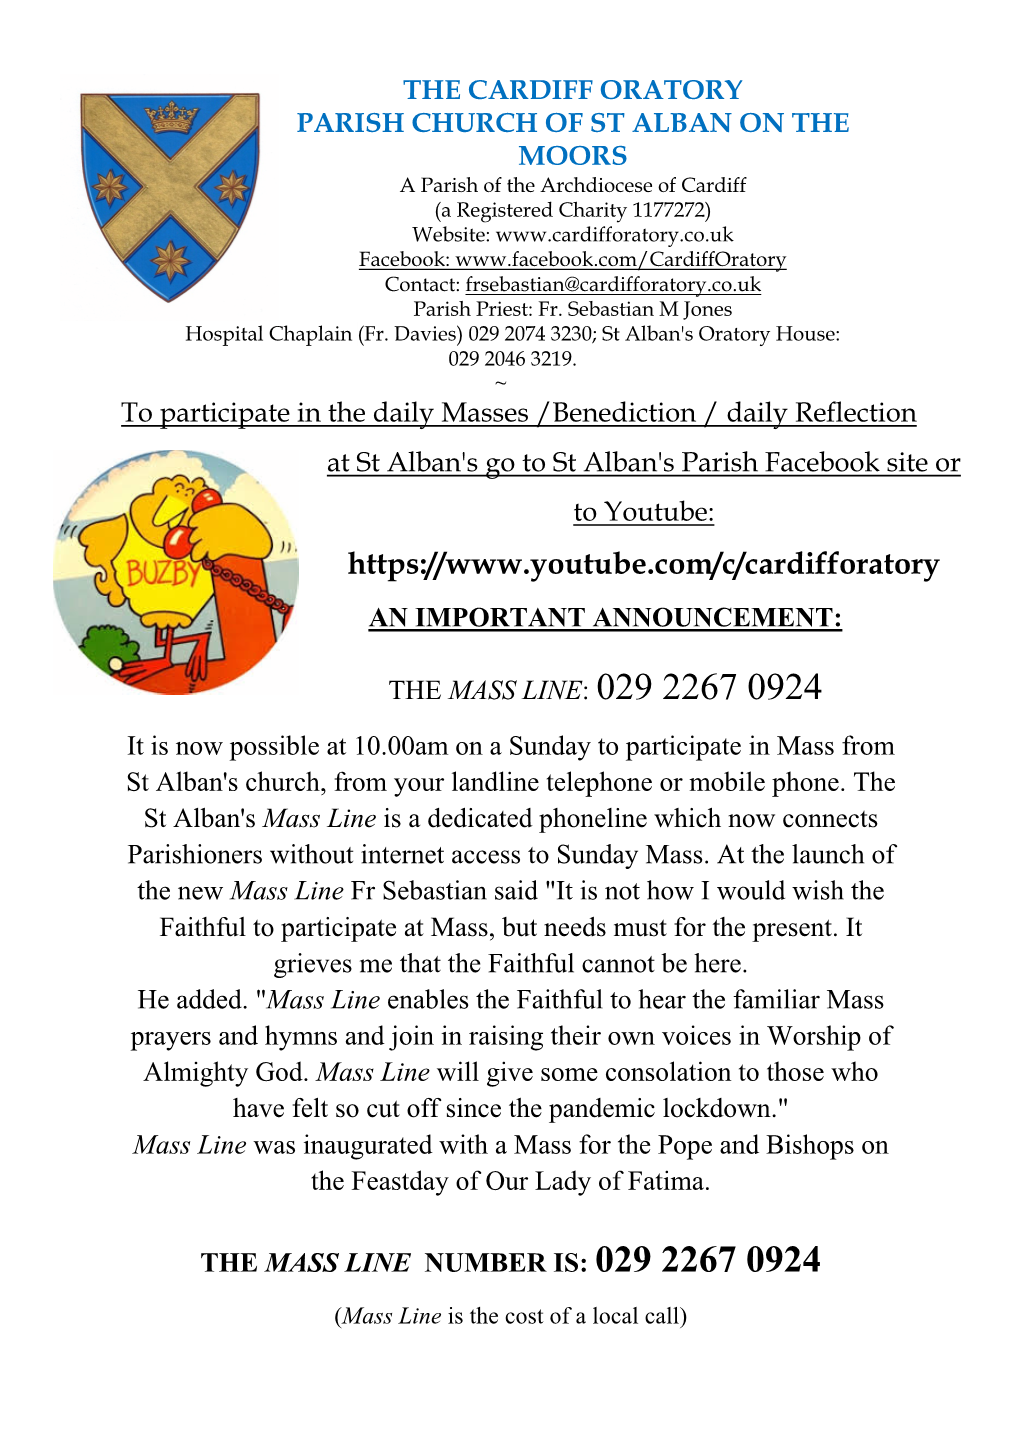 THE MASS LINE: 029 2267 0924 It Is Now Possible at 10.00Am on a Sunday to Participate in Mass from St Alban's Church, from Your Landline Telephone Or Mobile Phone